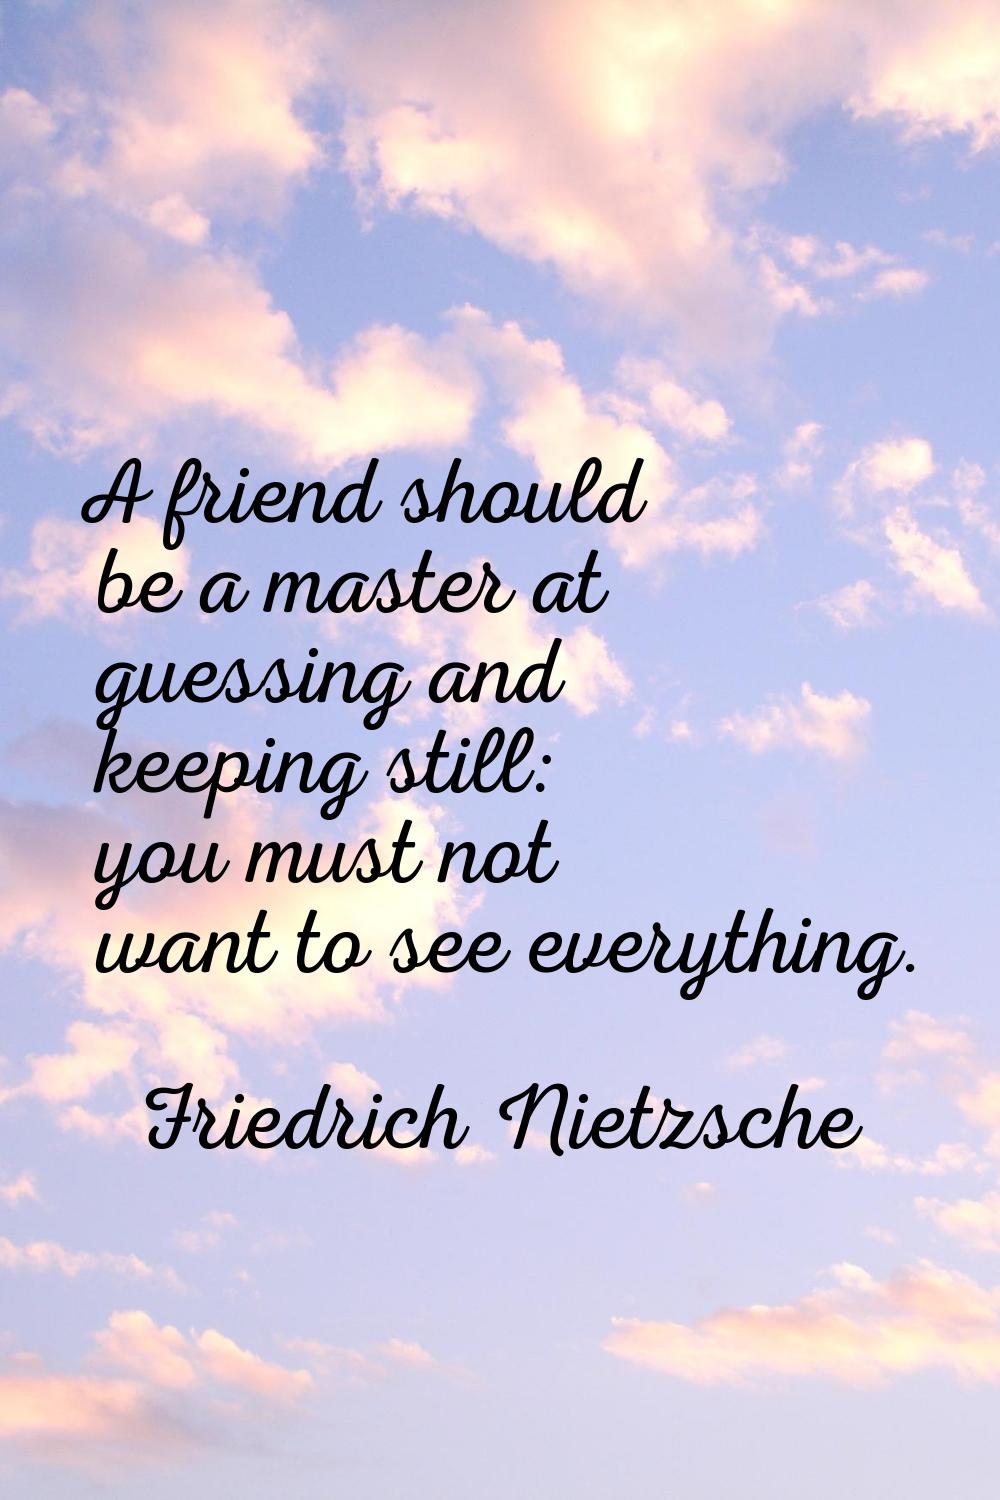 A friend should be a master at guessing and keeping still: you must not want to see everything.